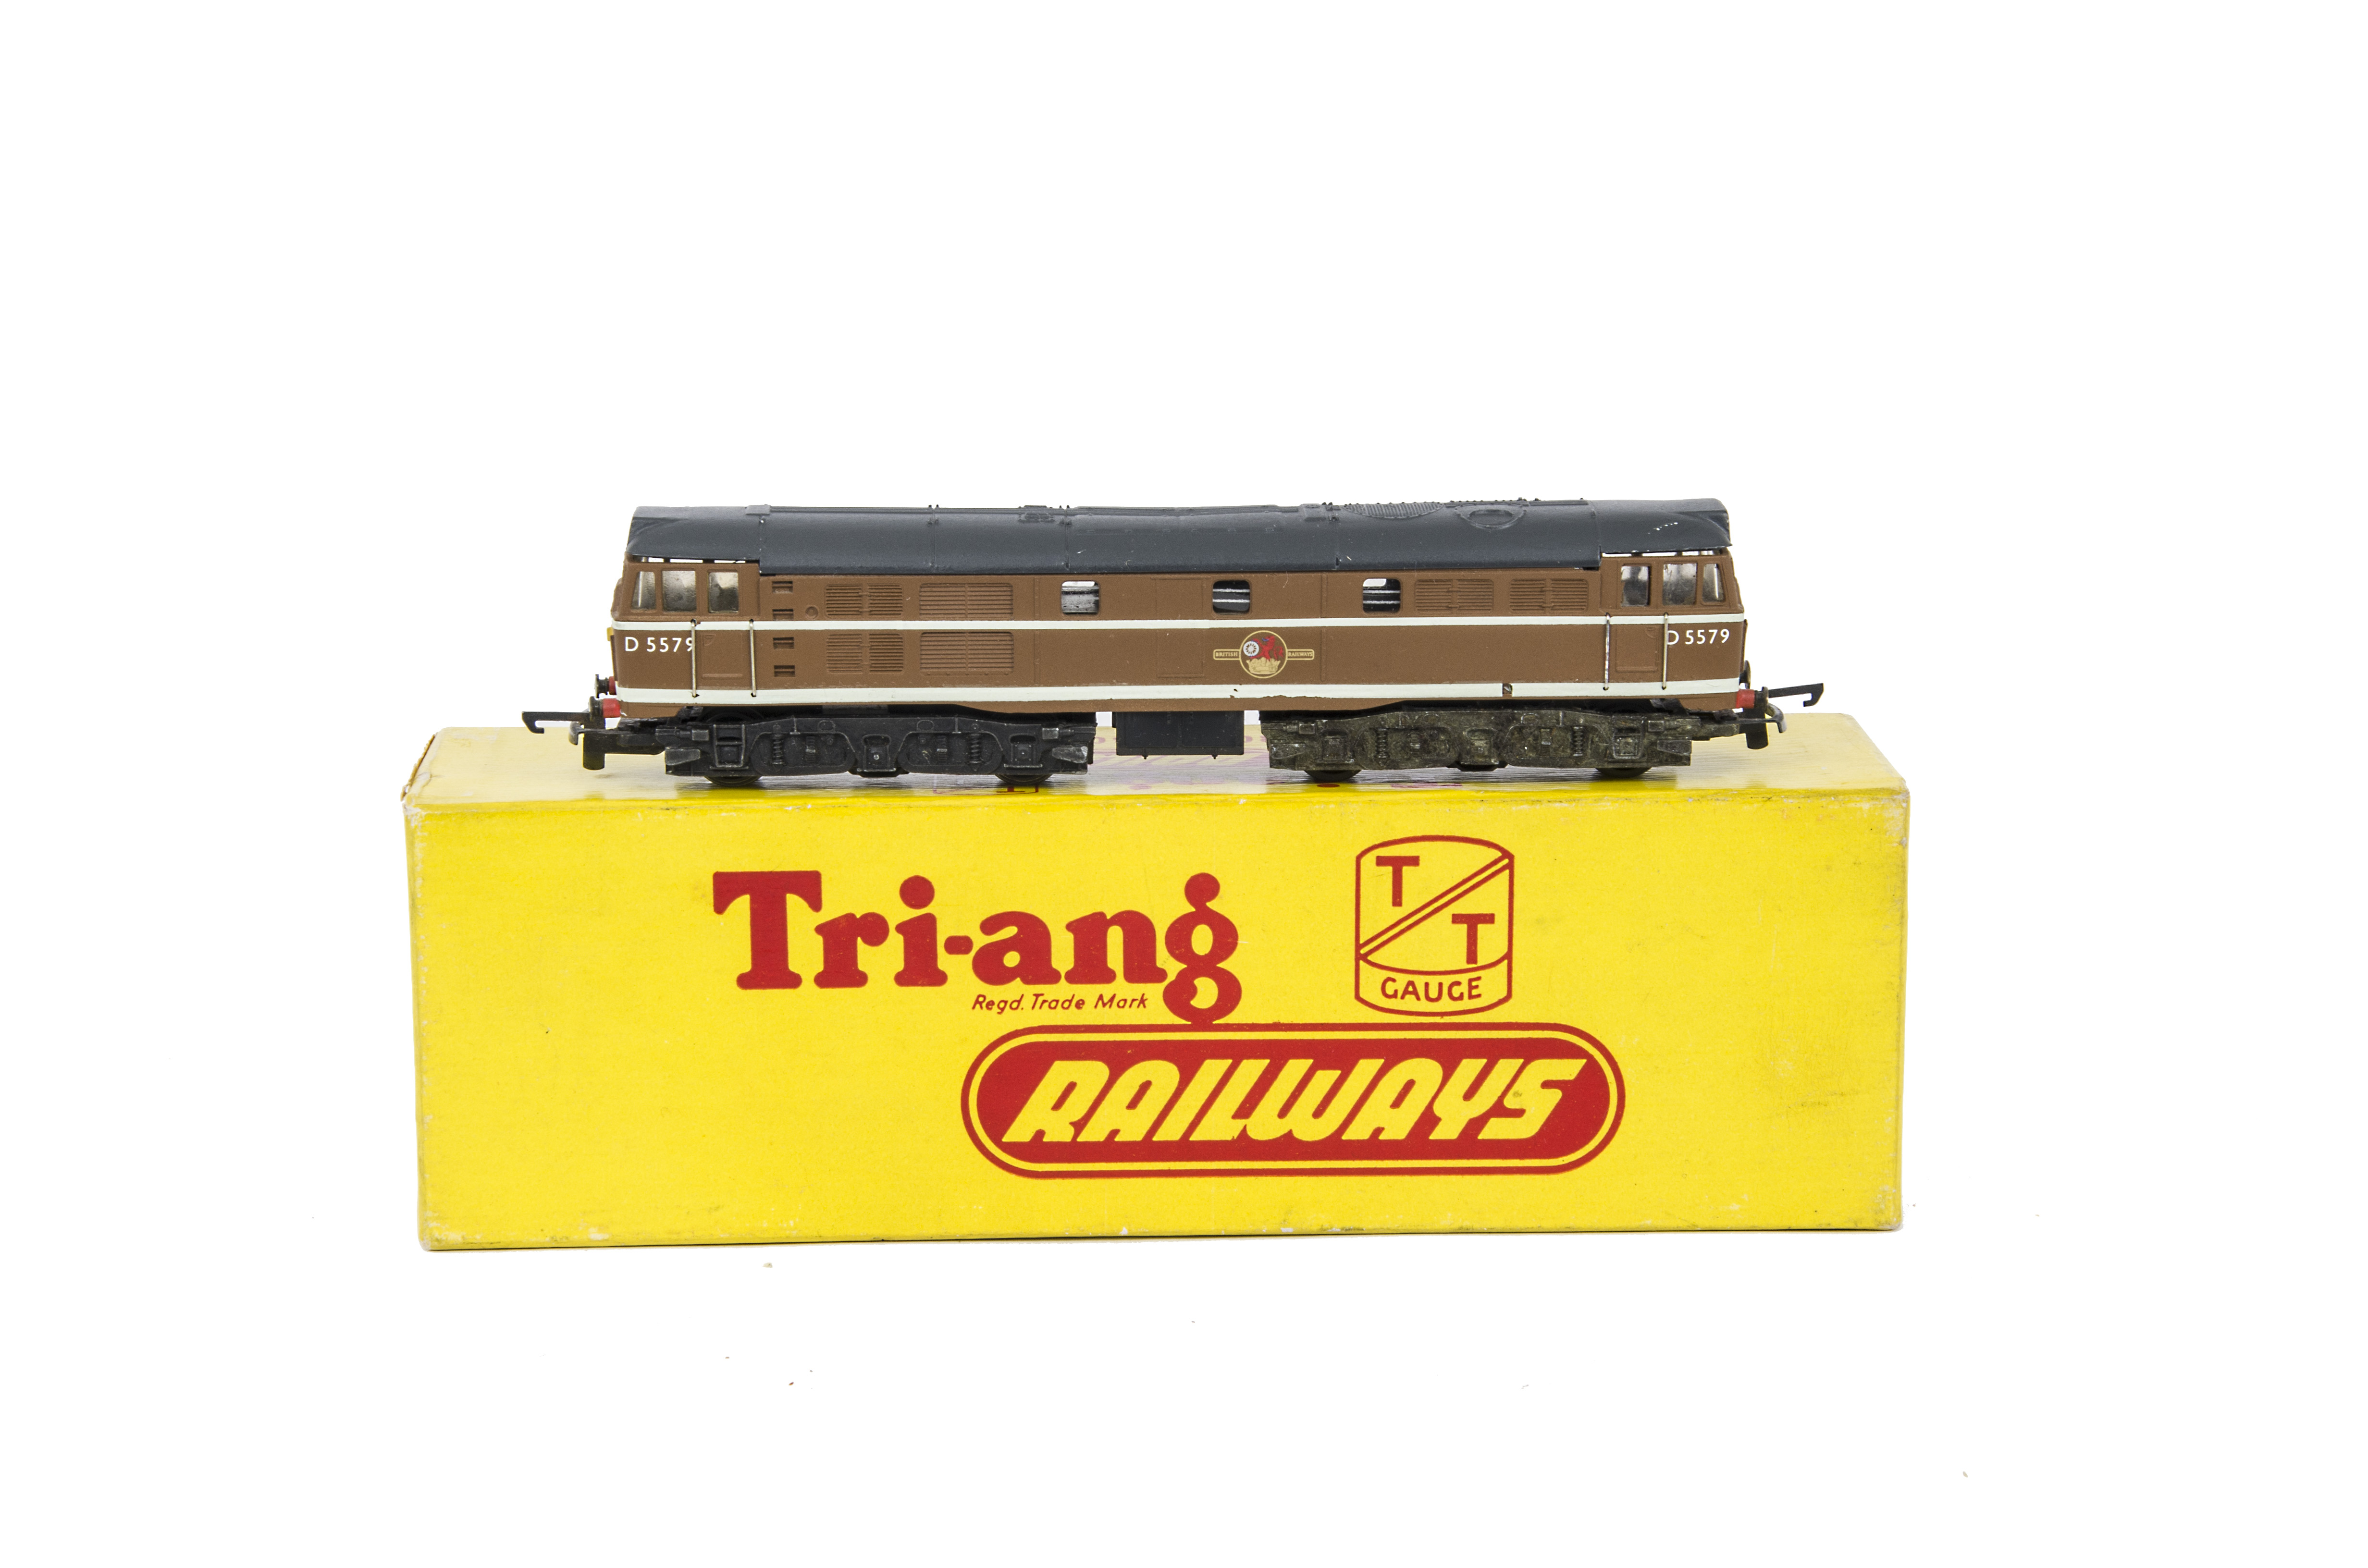 Tri-ang TT Gauge T96 A1A A1A Diesel Locomotive, repainted in ochre and numbered D5579, in original